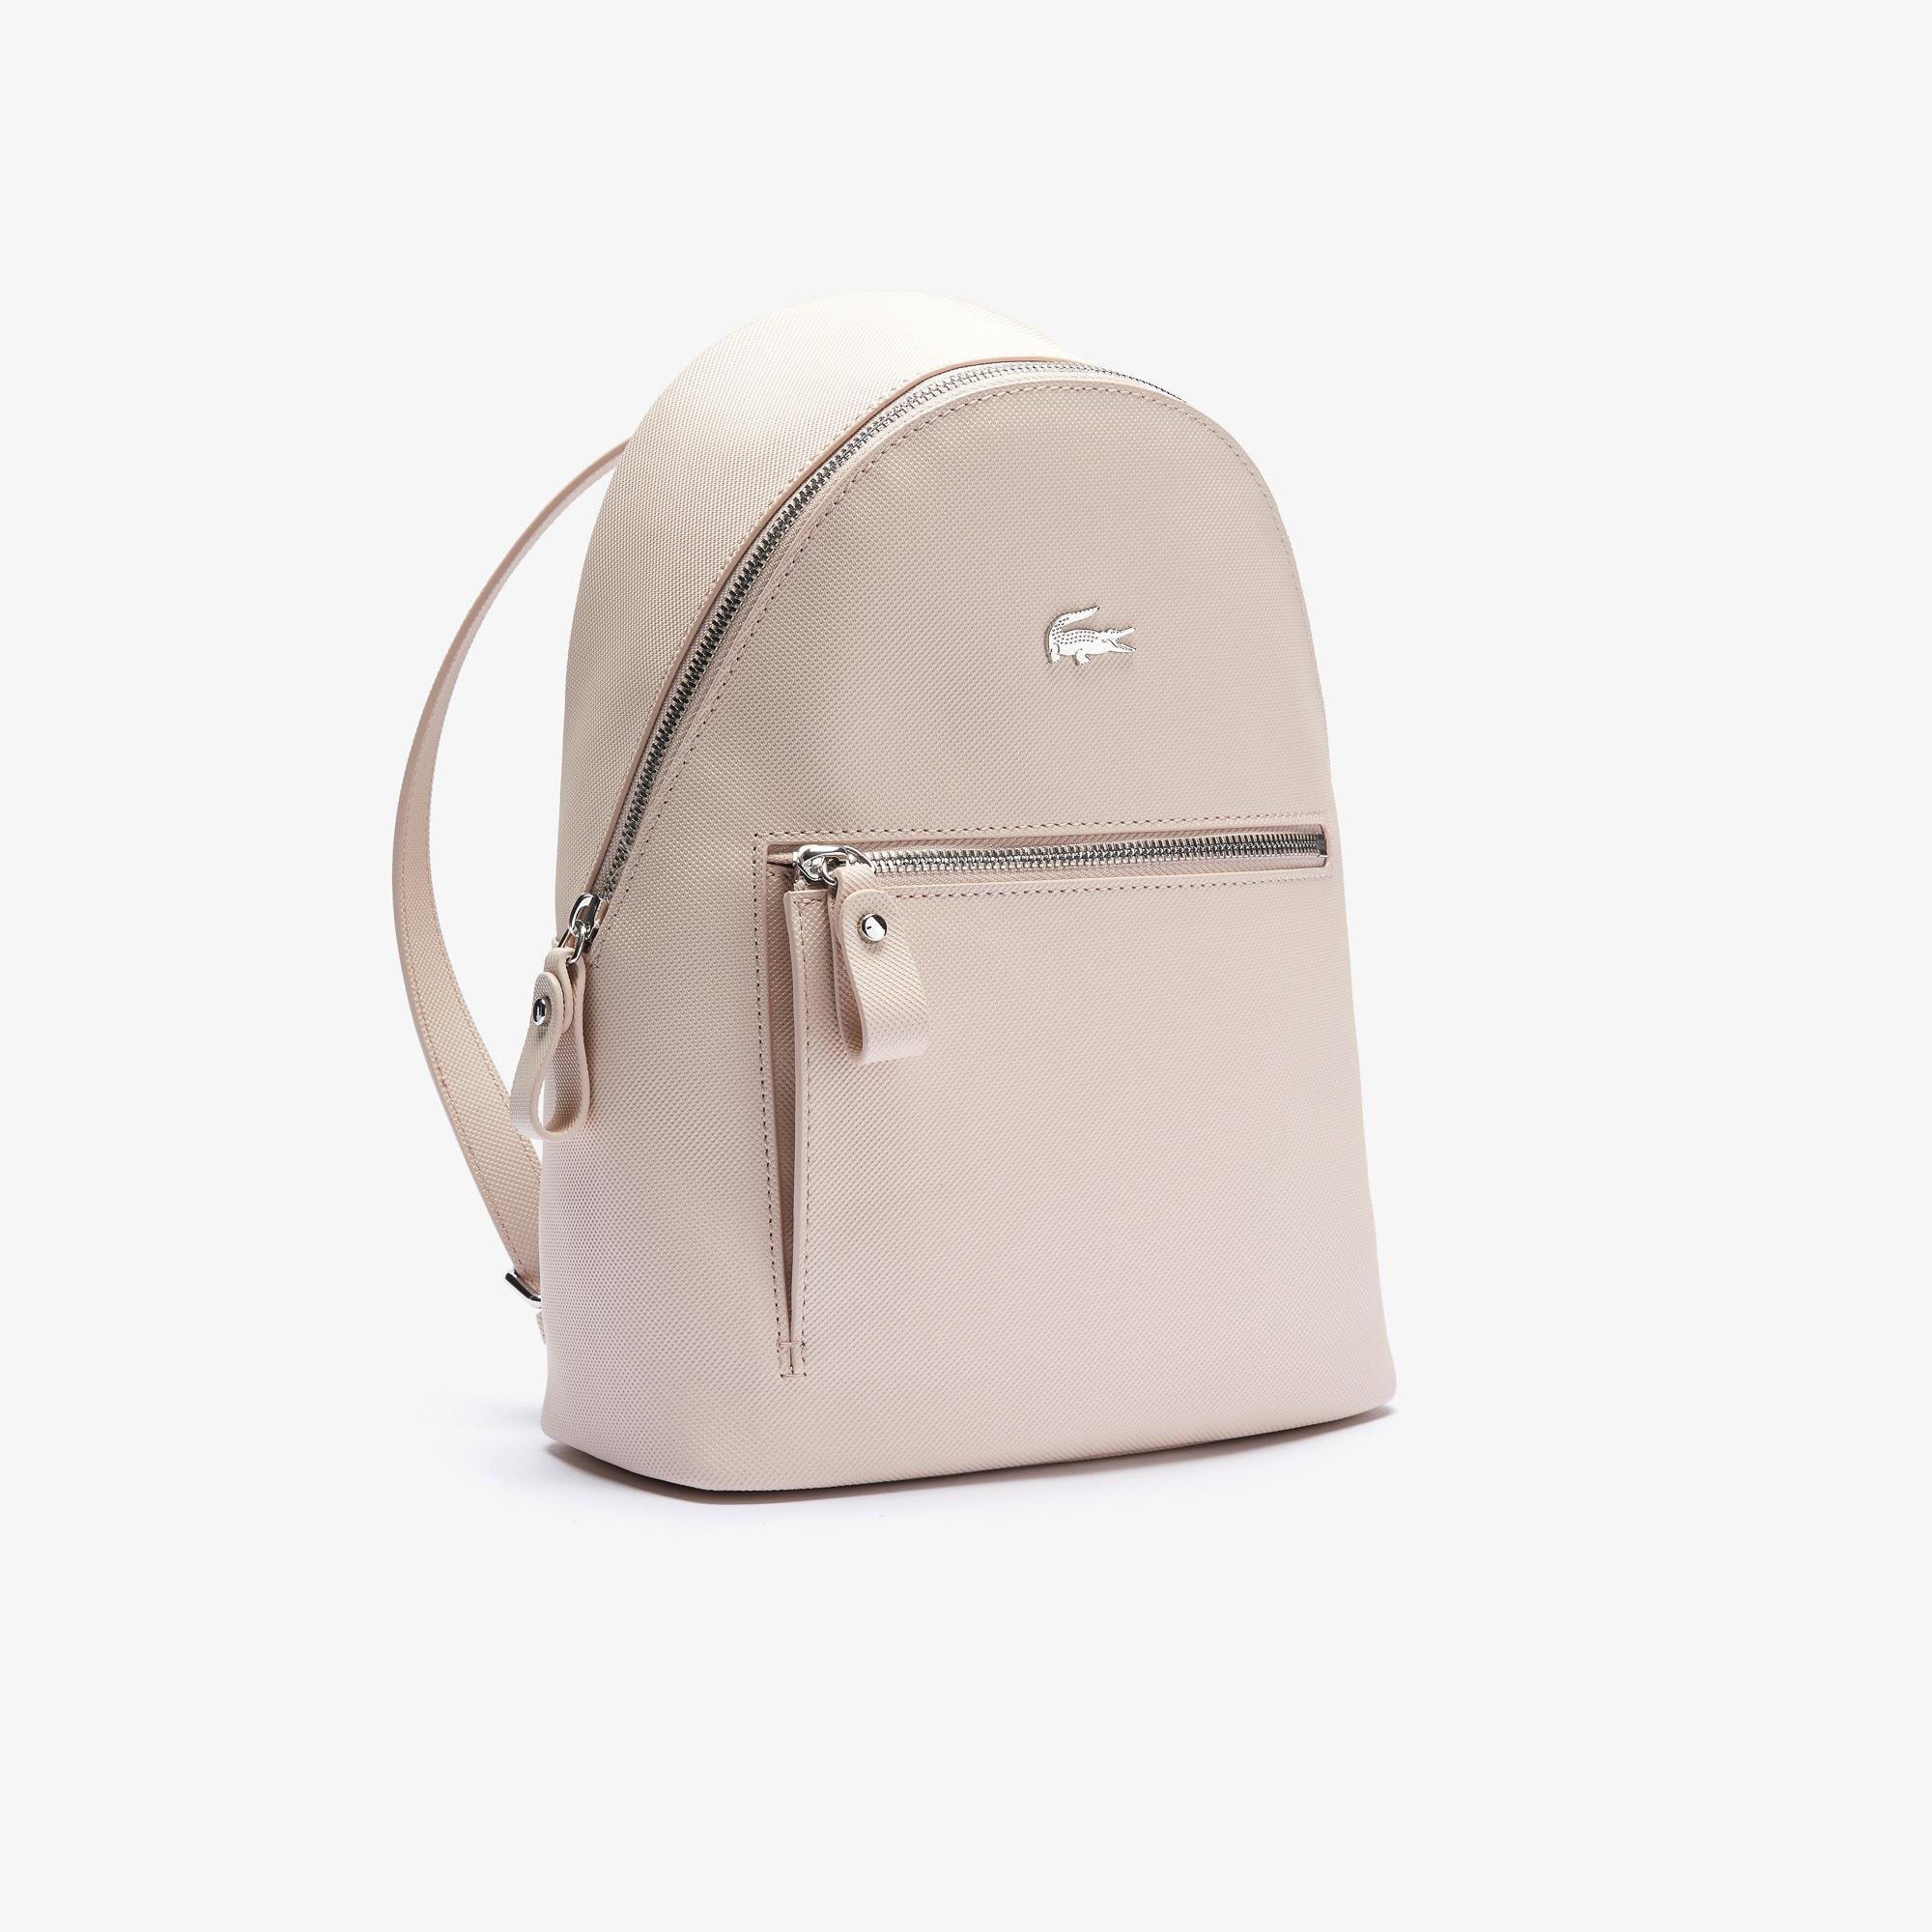 Lacoste Women's Daily Classic Coated Piqué Canvas Backpack